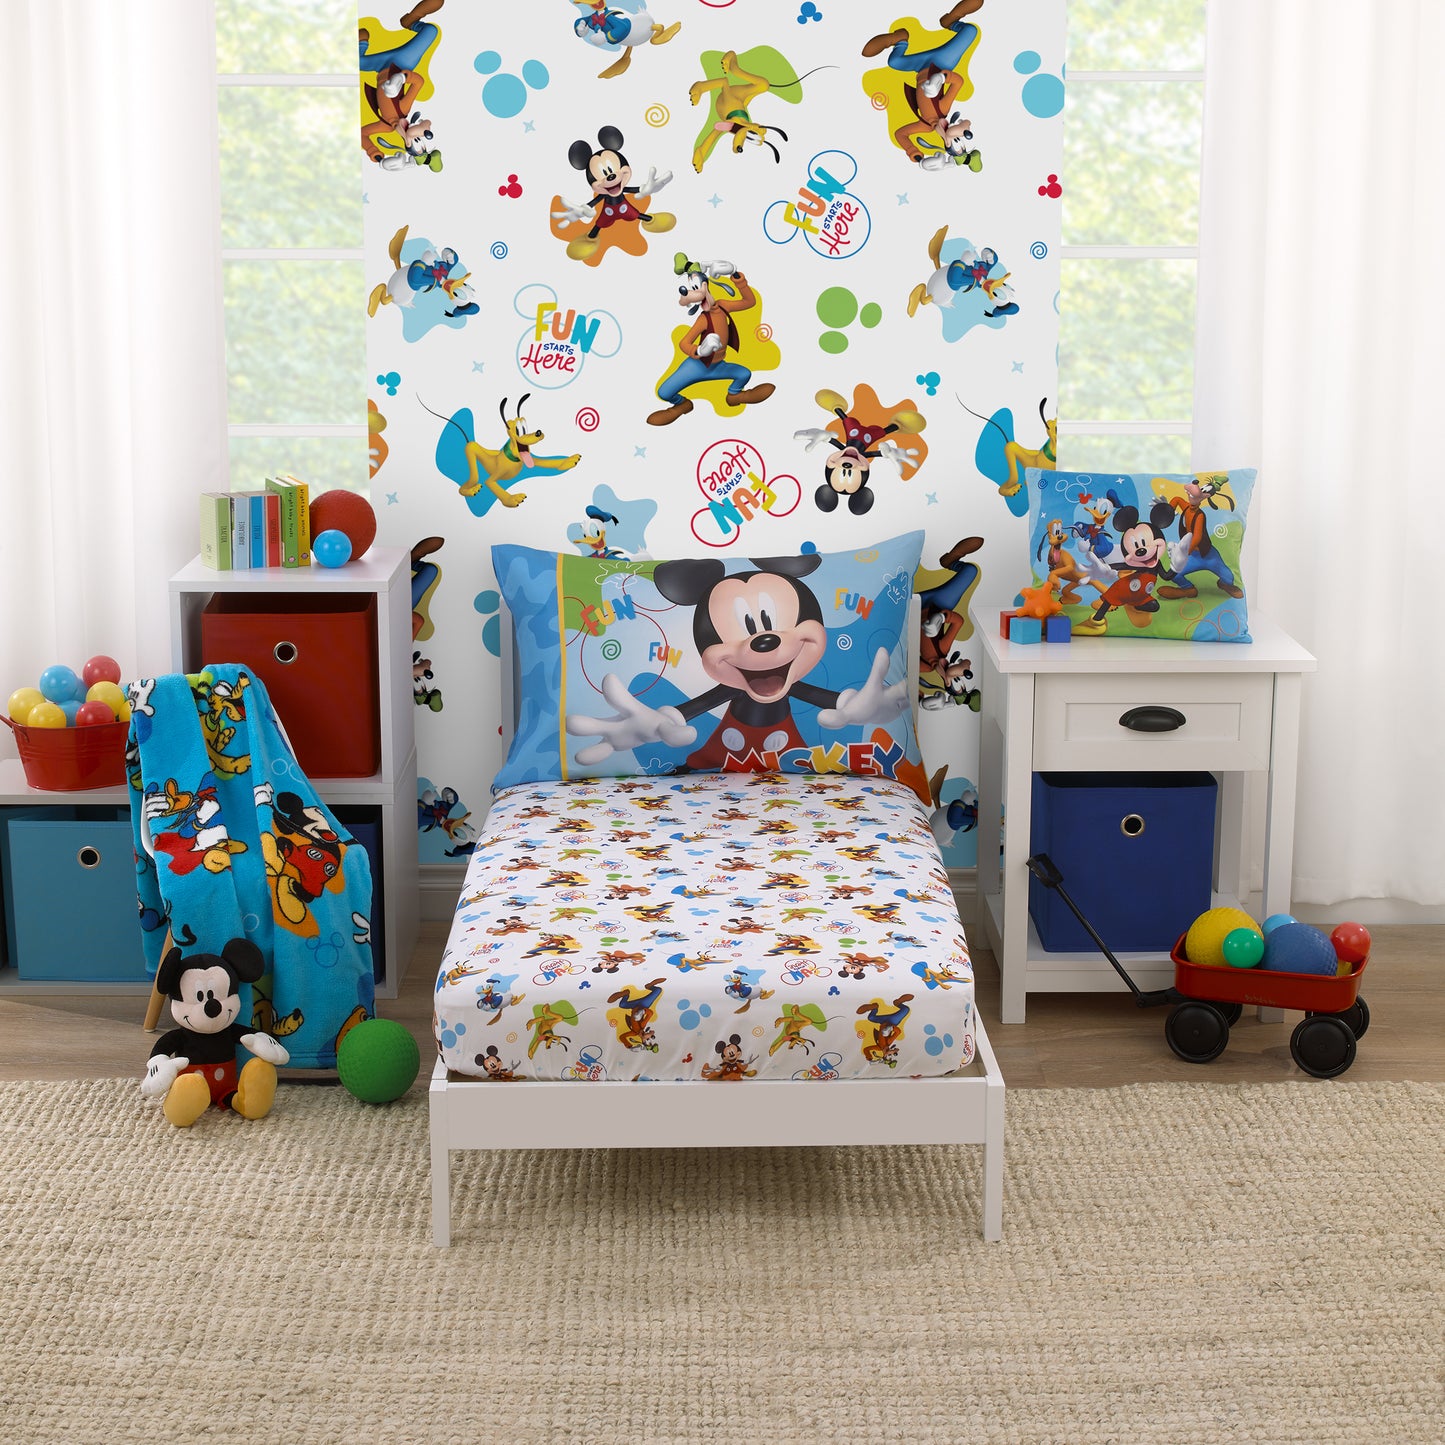 Disney Mickey Mouse Blue, Red, Green, and White, Donald Duck, Pluto, and Goofy, Fun Starts Here 2 Piece Toddler Sheet Set - Fitted Bottom Sheet, and Reversible Pillowcase